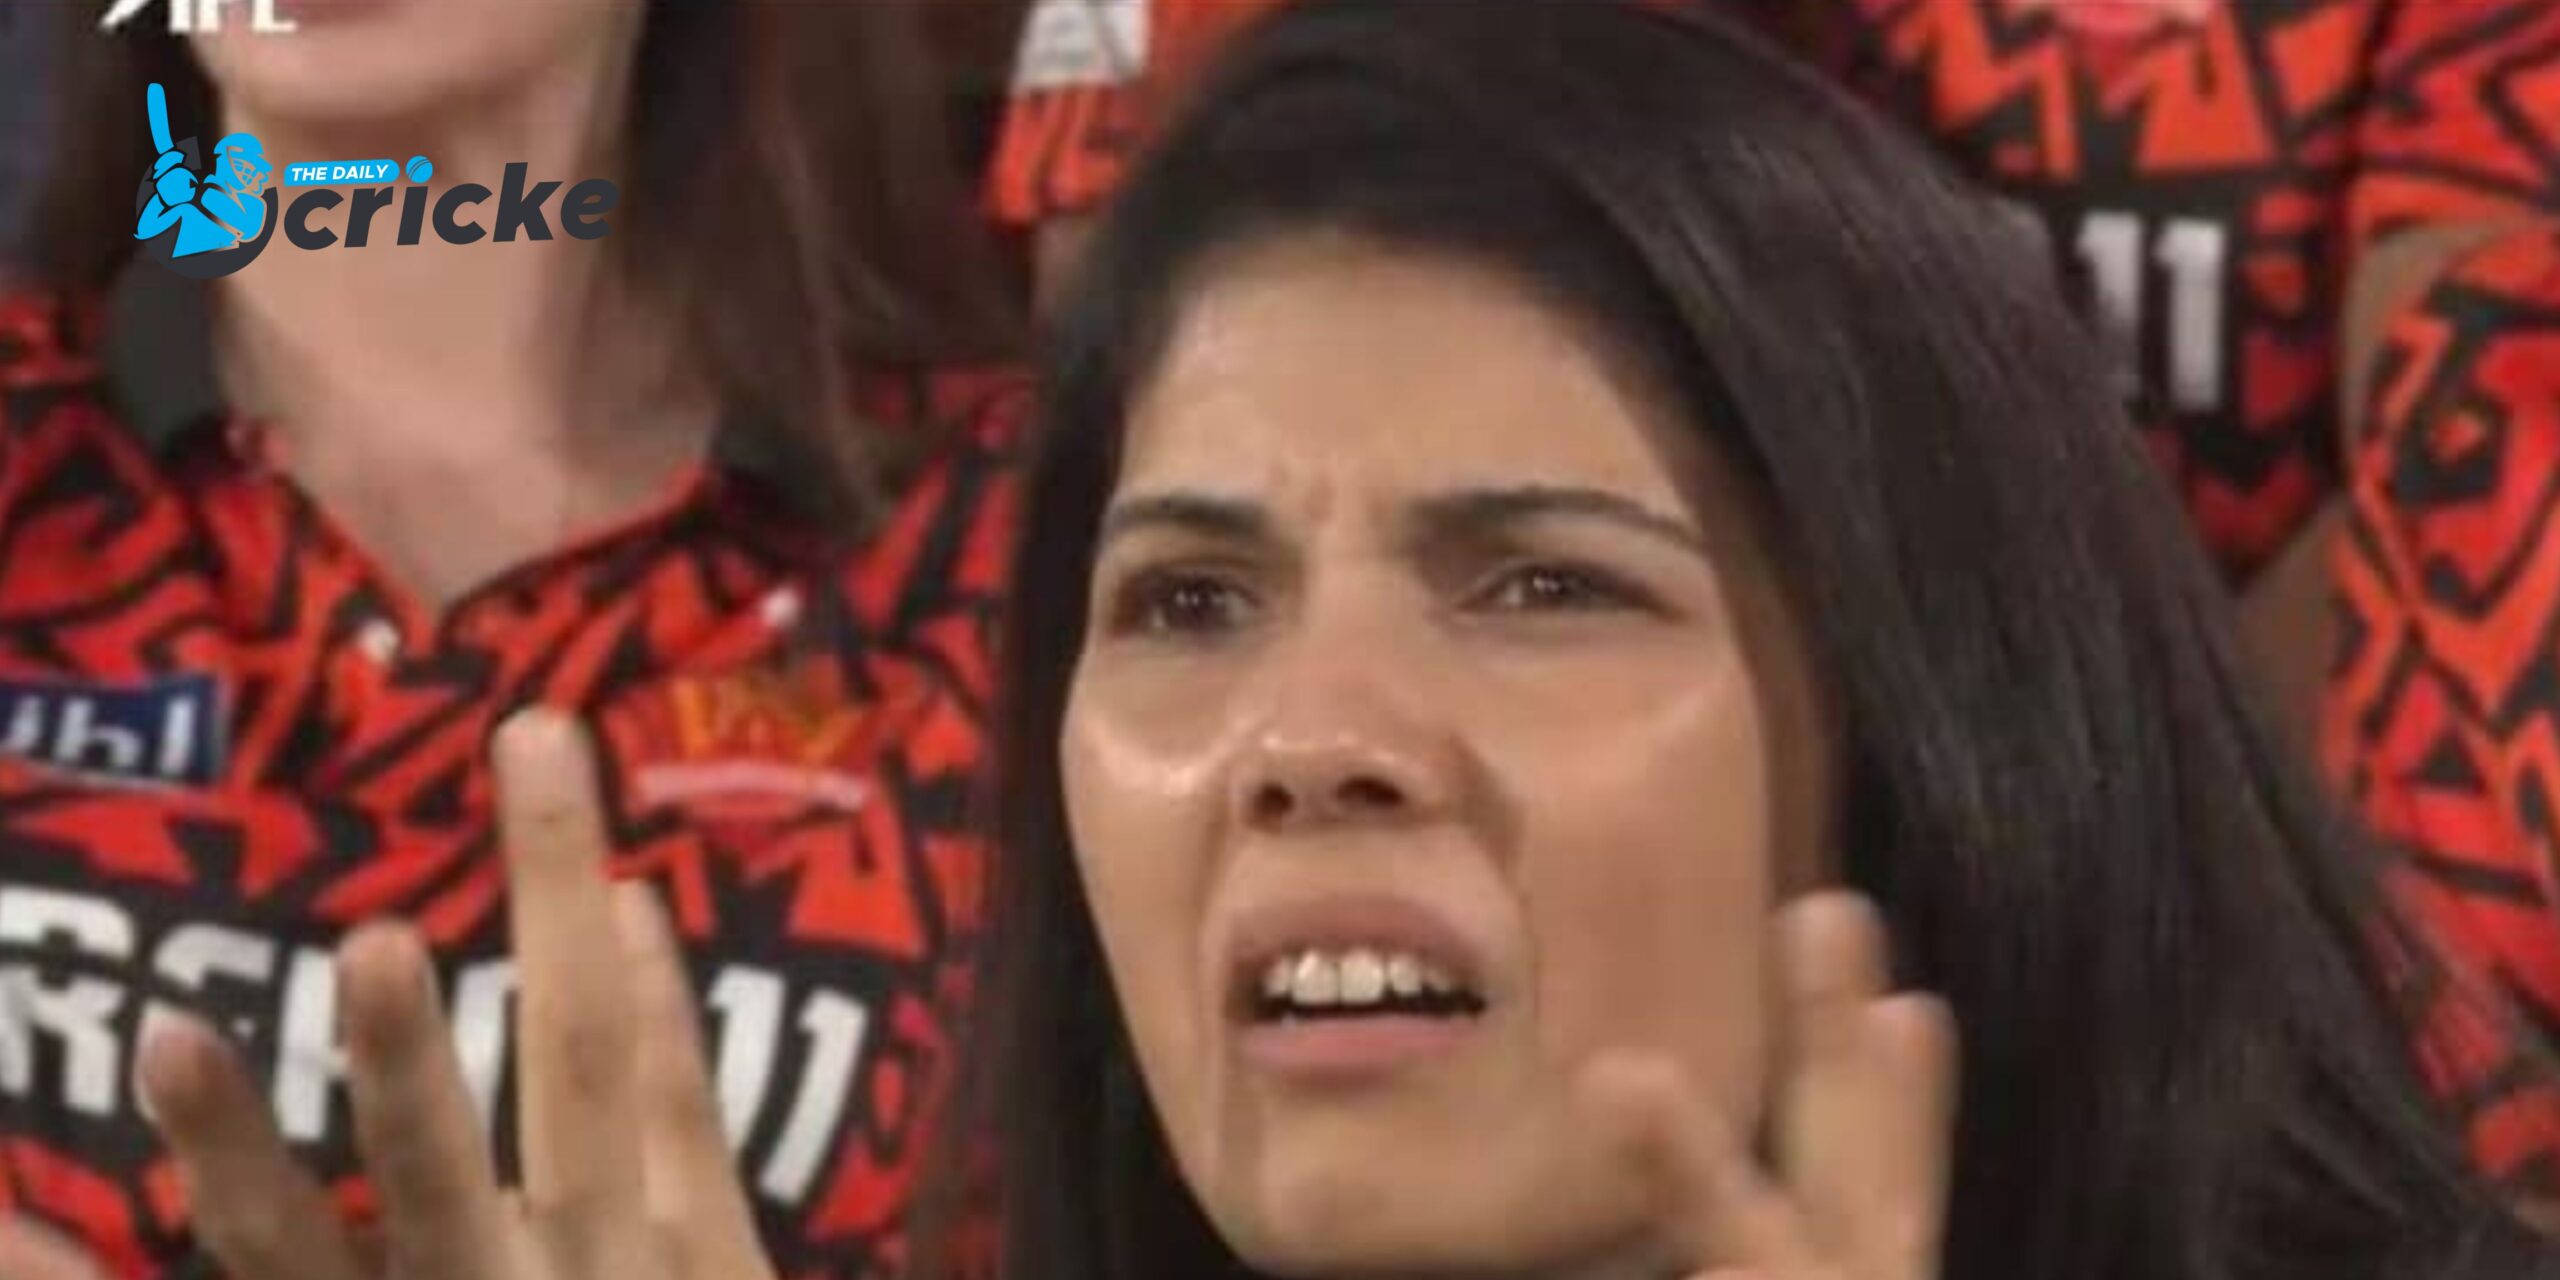 Watch the video to see Kavya Maran's shocking response to SRH's lacklustre performance against RCB sparking a meme fest.